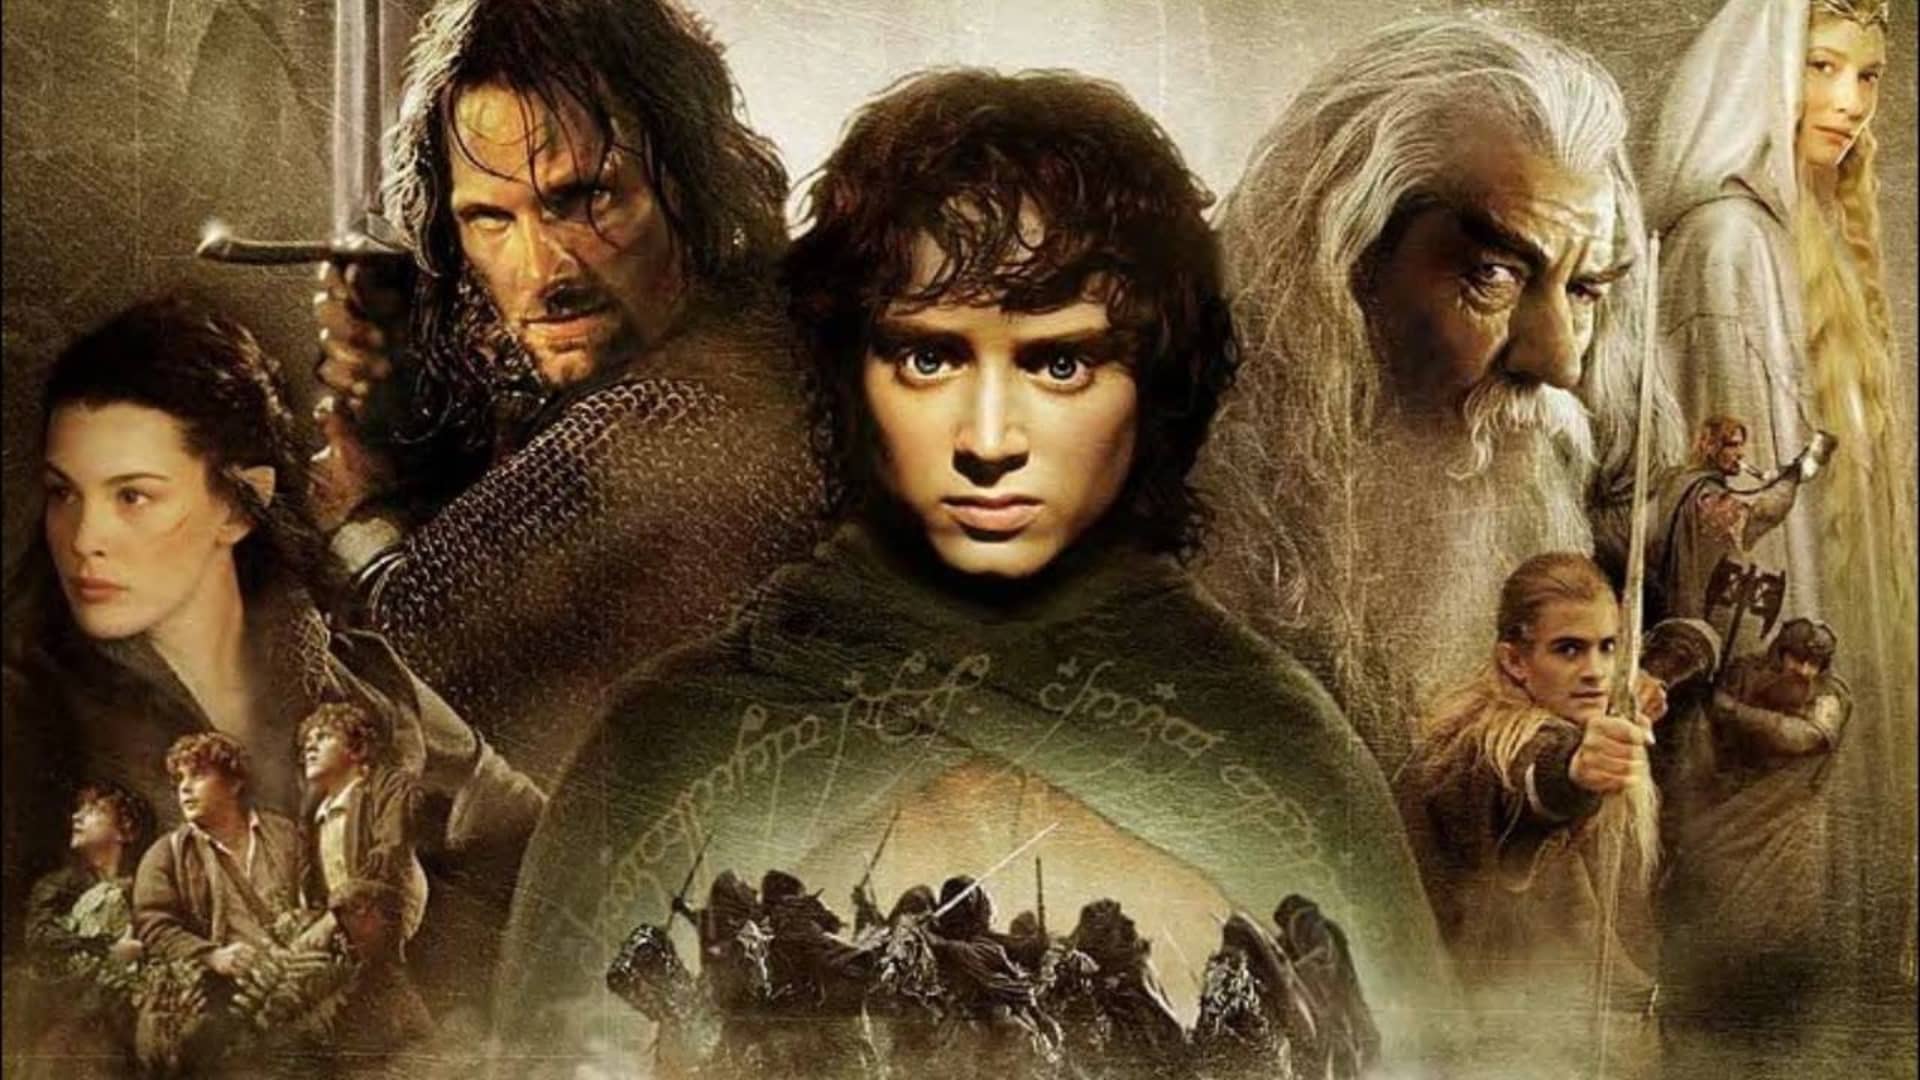 Embracer Group buys rights to ‘Lord of the Rings’ films, other Tolkien intellectual property